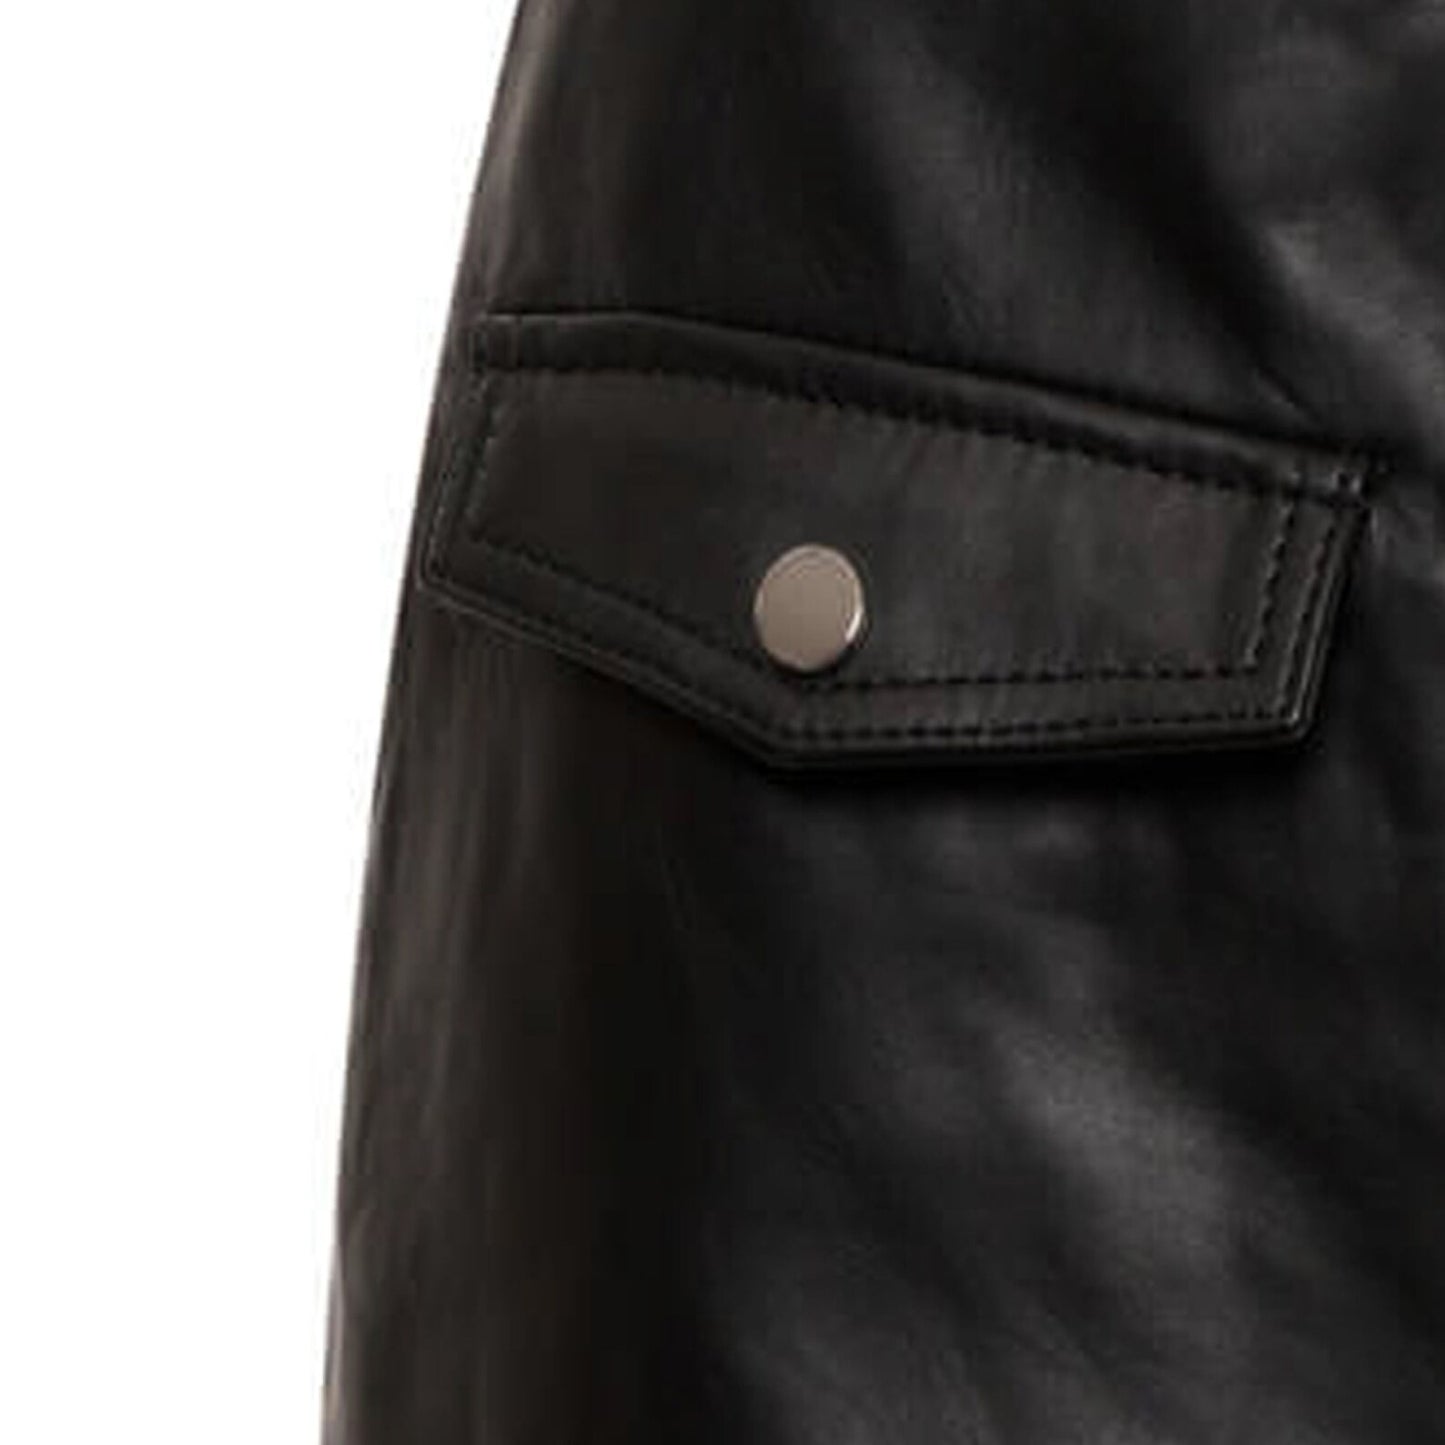 Genuine Women Leather Skirt with Front Zip